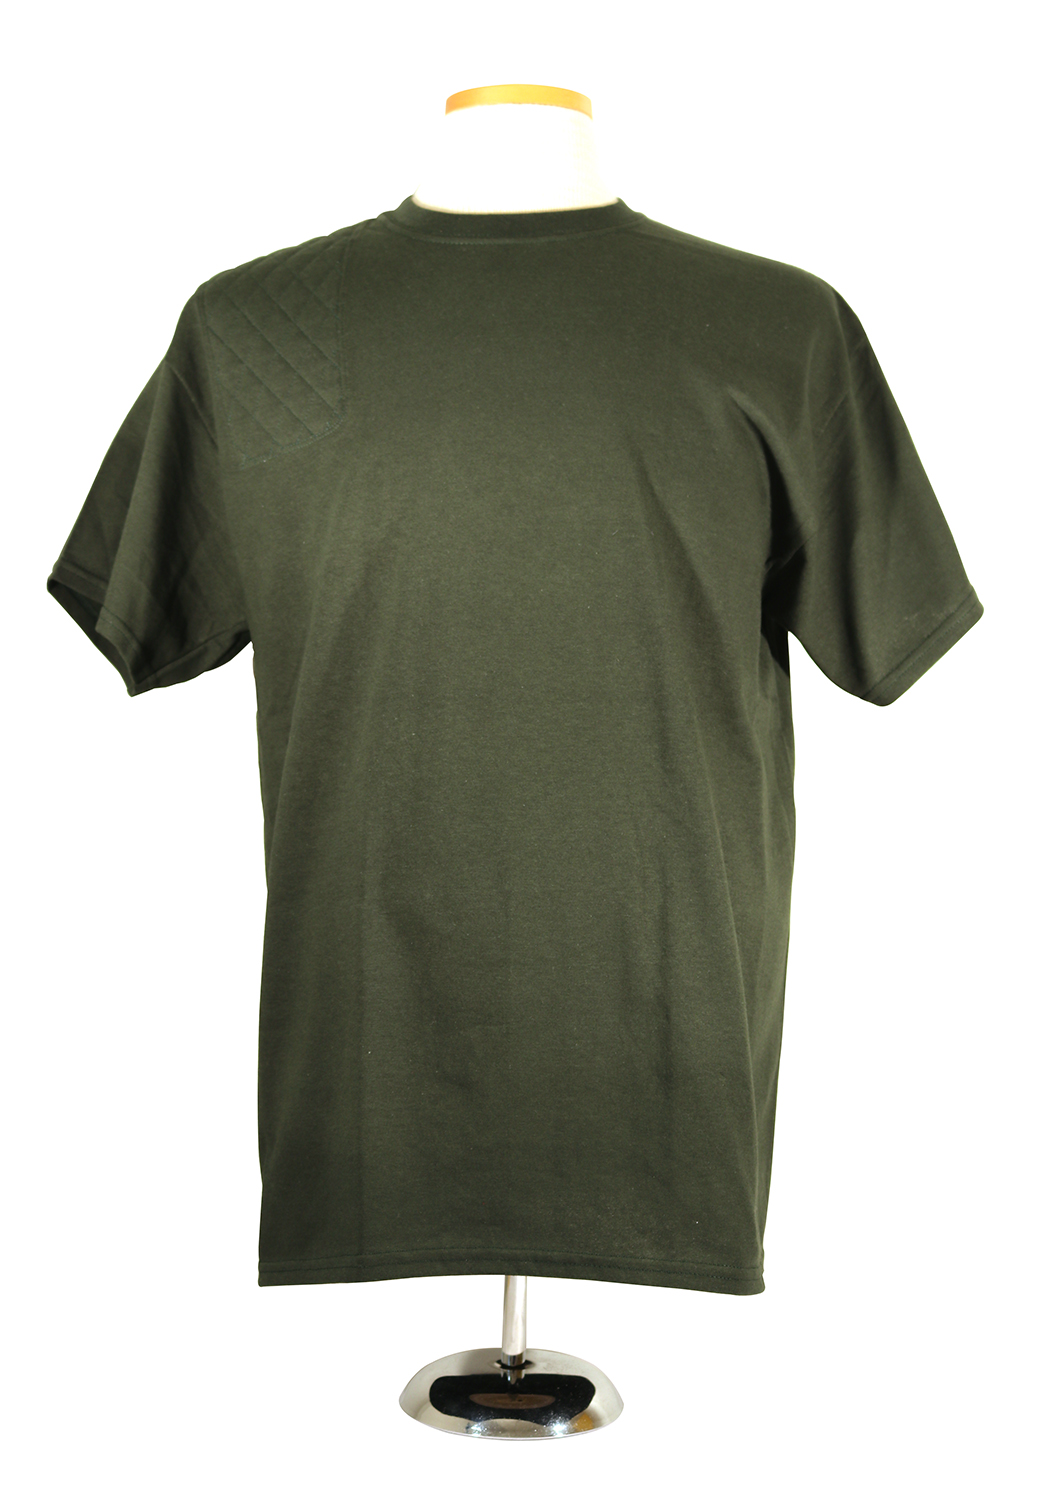 #2000 Cotton Tee Short Sleeve - Right hand, single layer pad, forest green